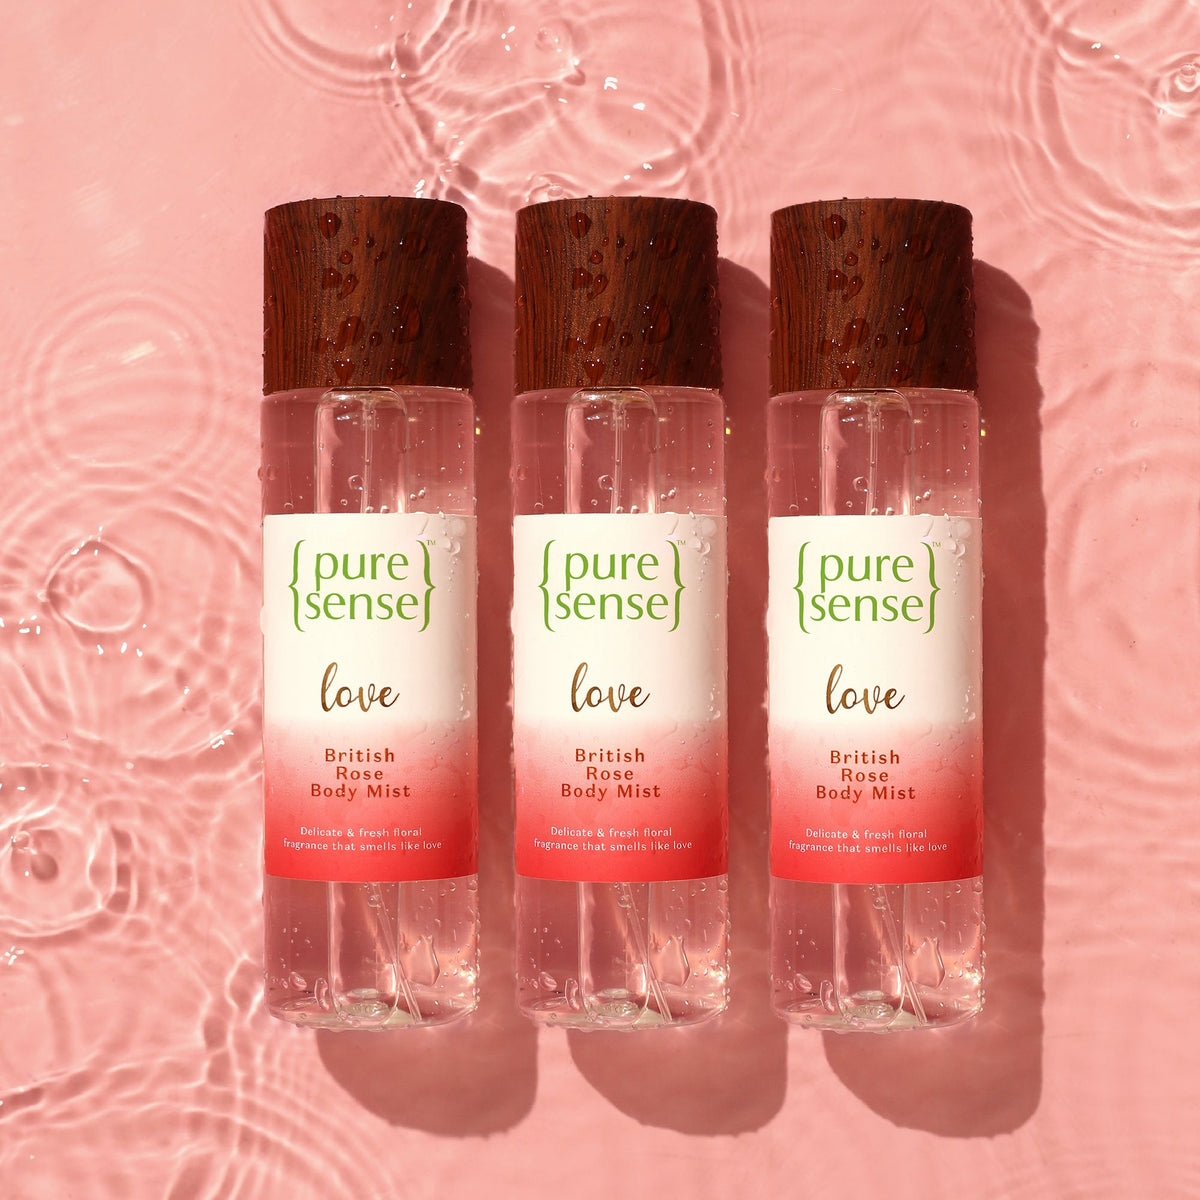 [JIO] Love British Rose Body Mist (Pack of 3) | From the makers of Parachute Advansed |  450ml